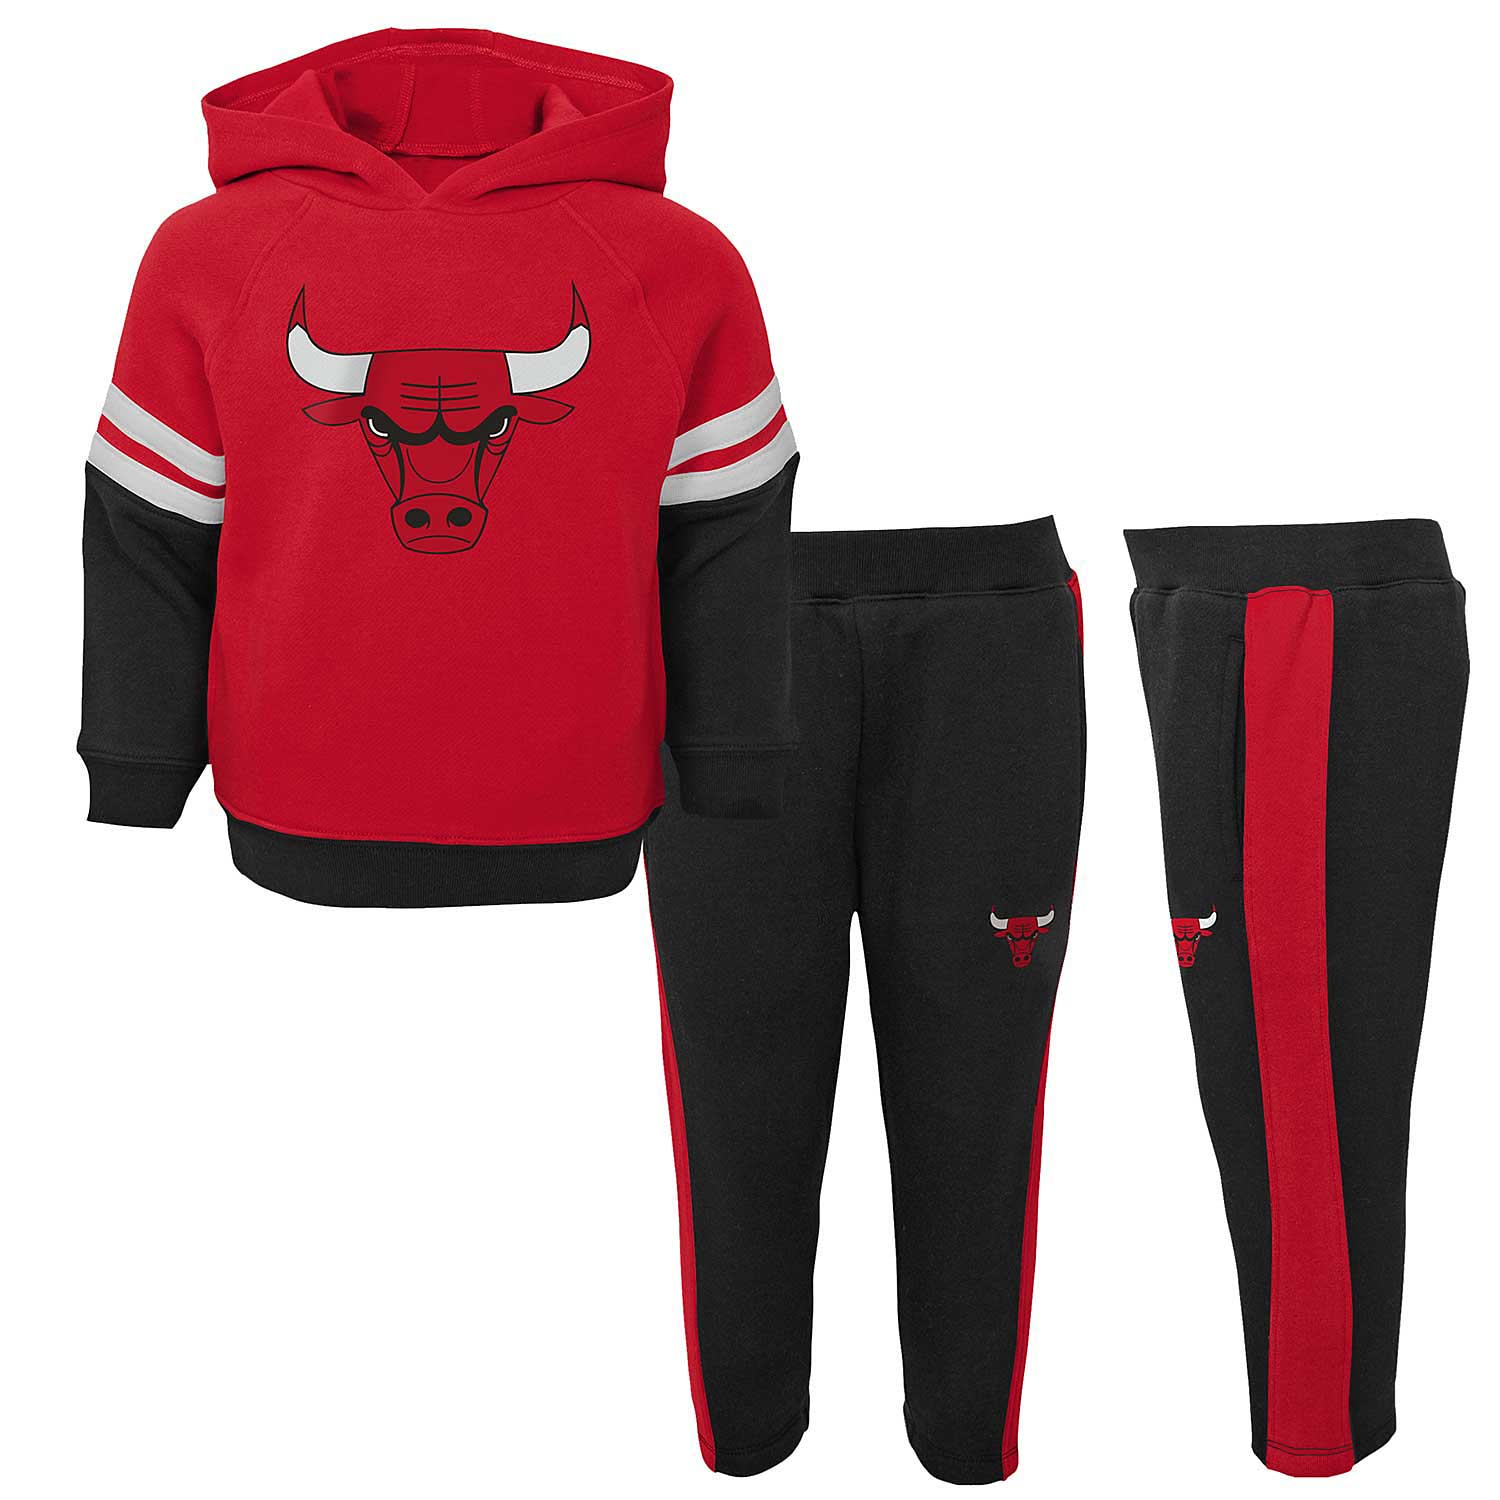 Kids Chicago Bulls outfit